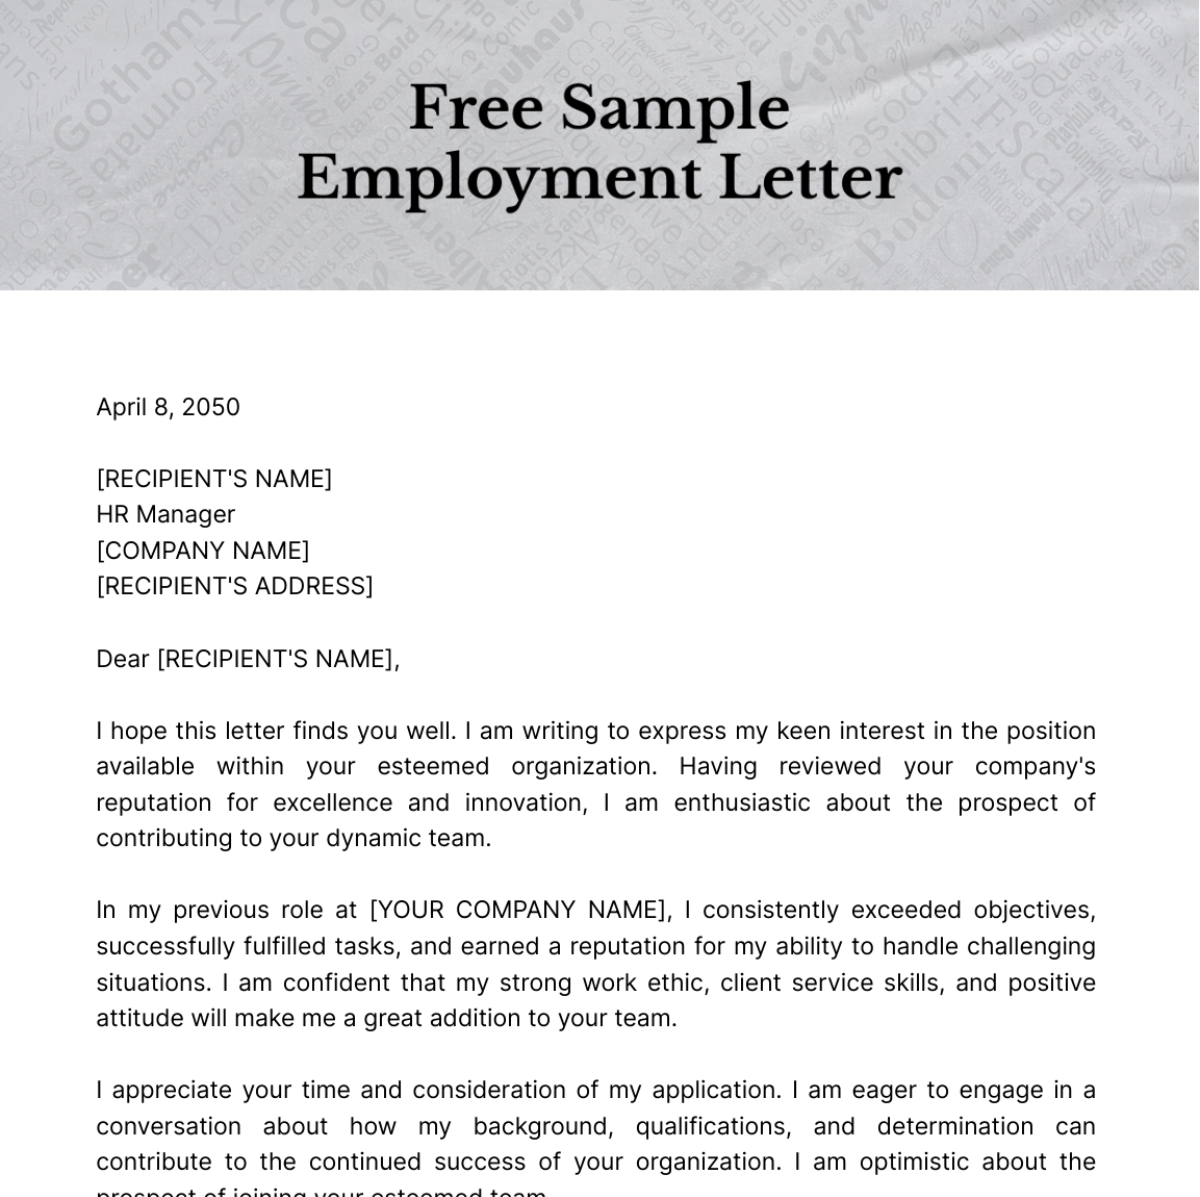 Sample Employment Letter Template